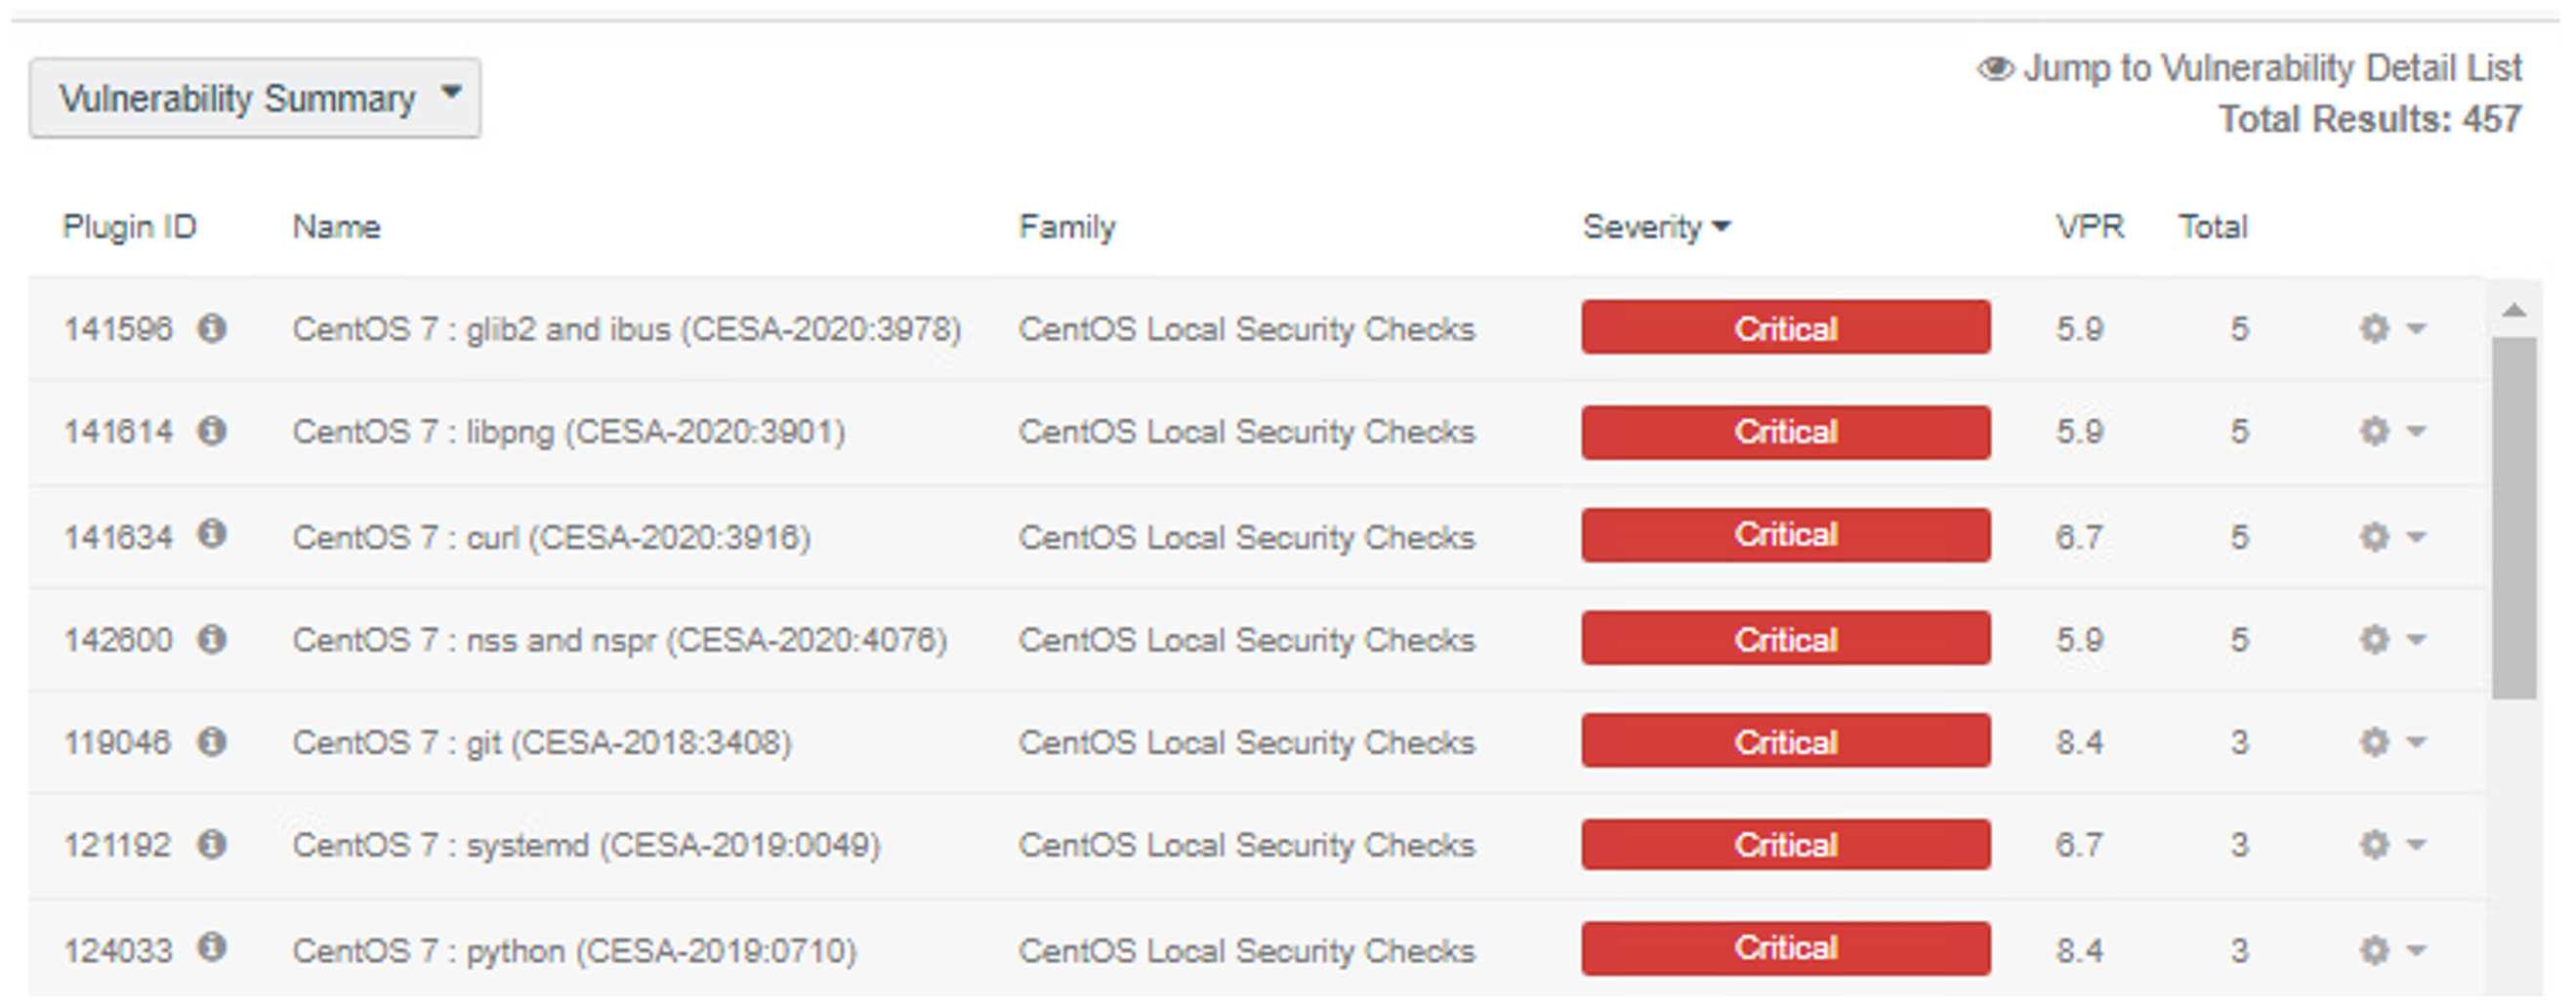 This is a screenshot of the vulnerability summary page, which lists observed vulnerabilities and provides information about each one.